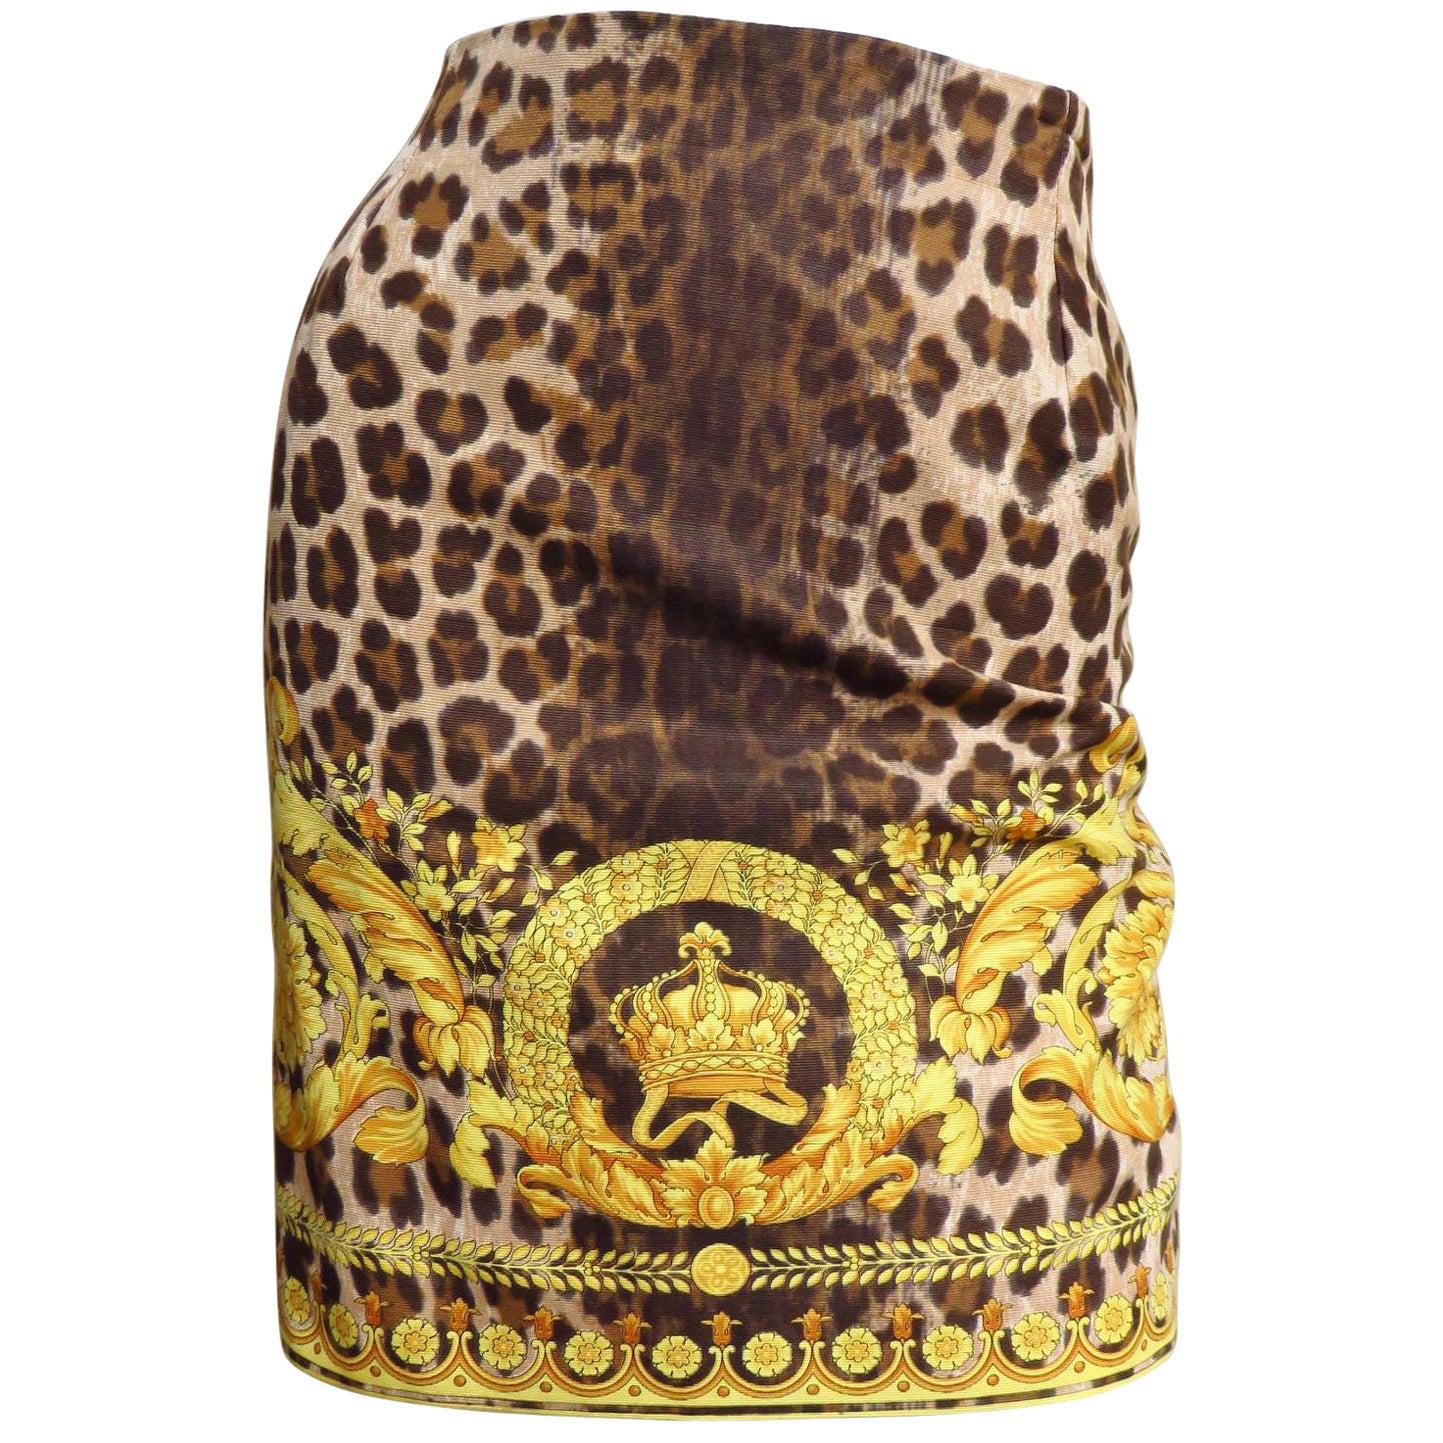  Gianni Versace Couture Leopard Baroque Print Skirt 1990s